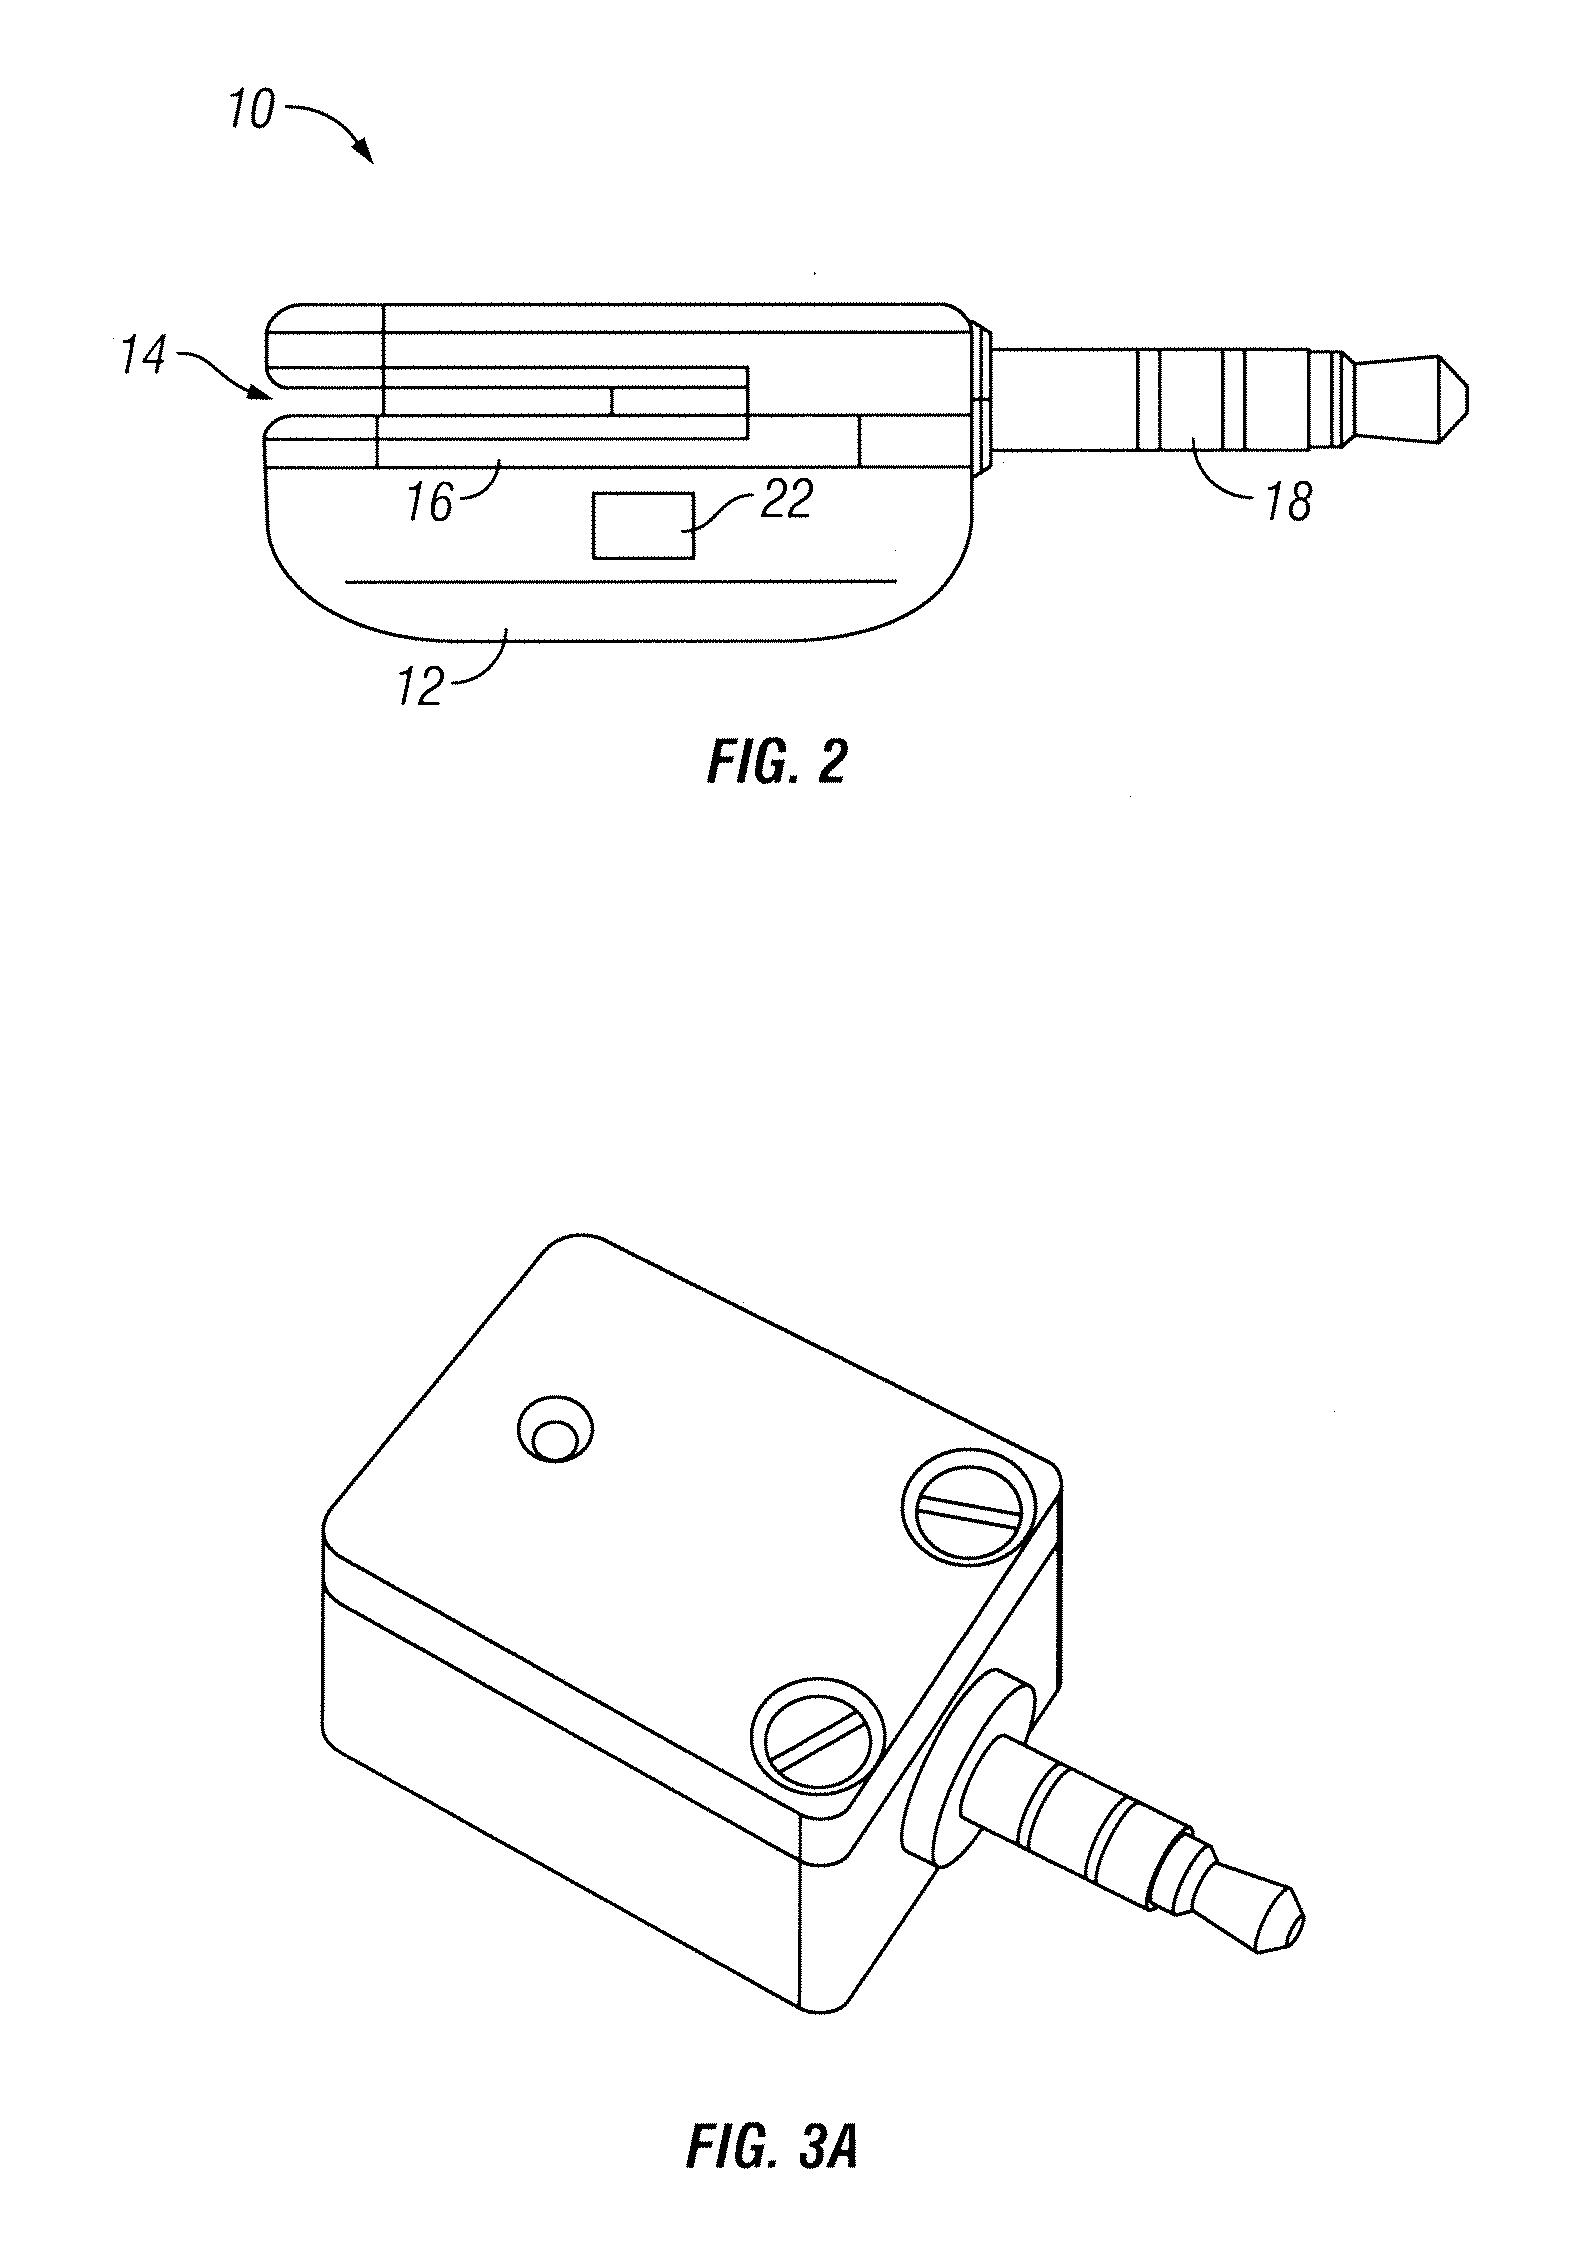 Read head device with slot configured to reduce torque